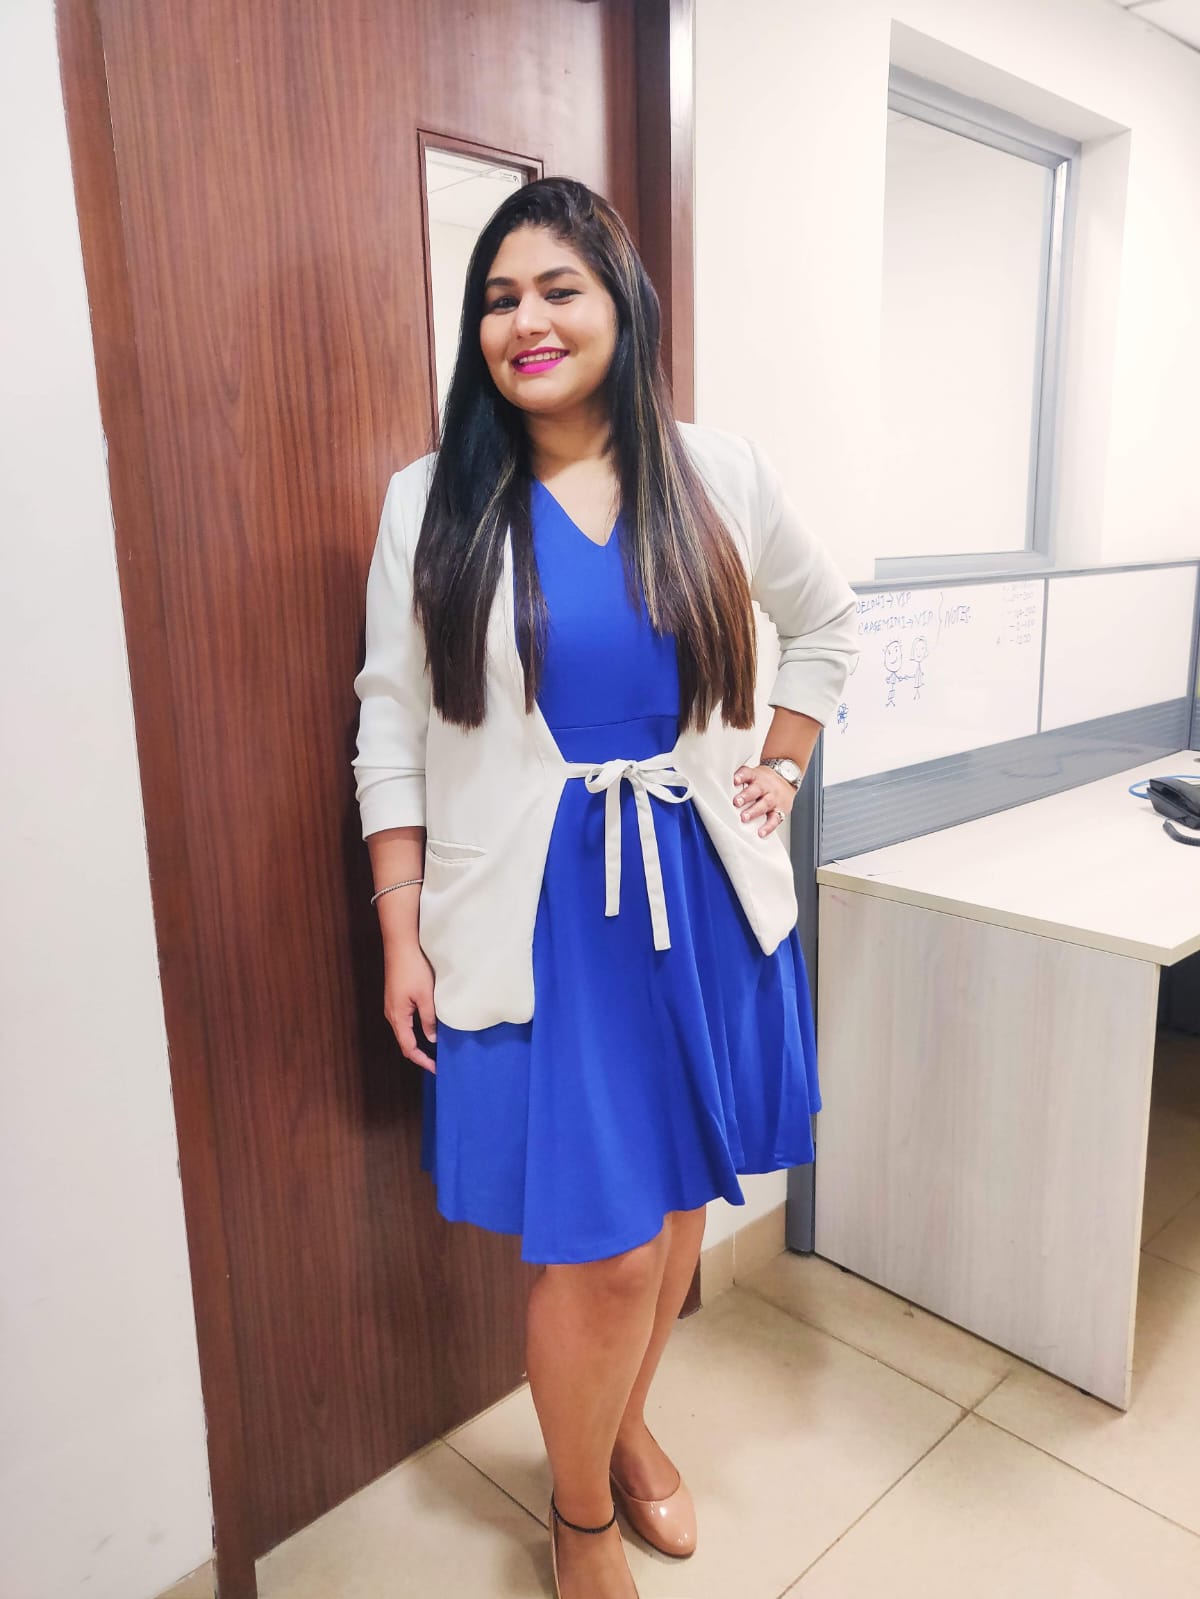 The Den, Bengaluru Appoints Garima Singh as Director of Sales and Marketing